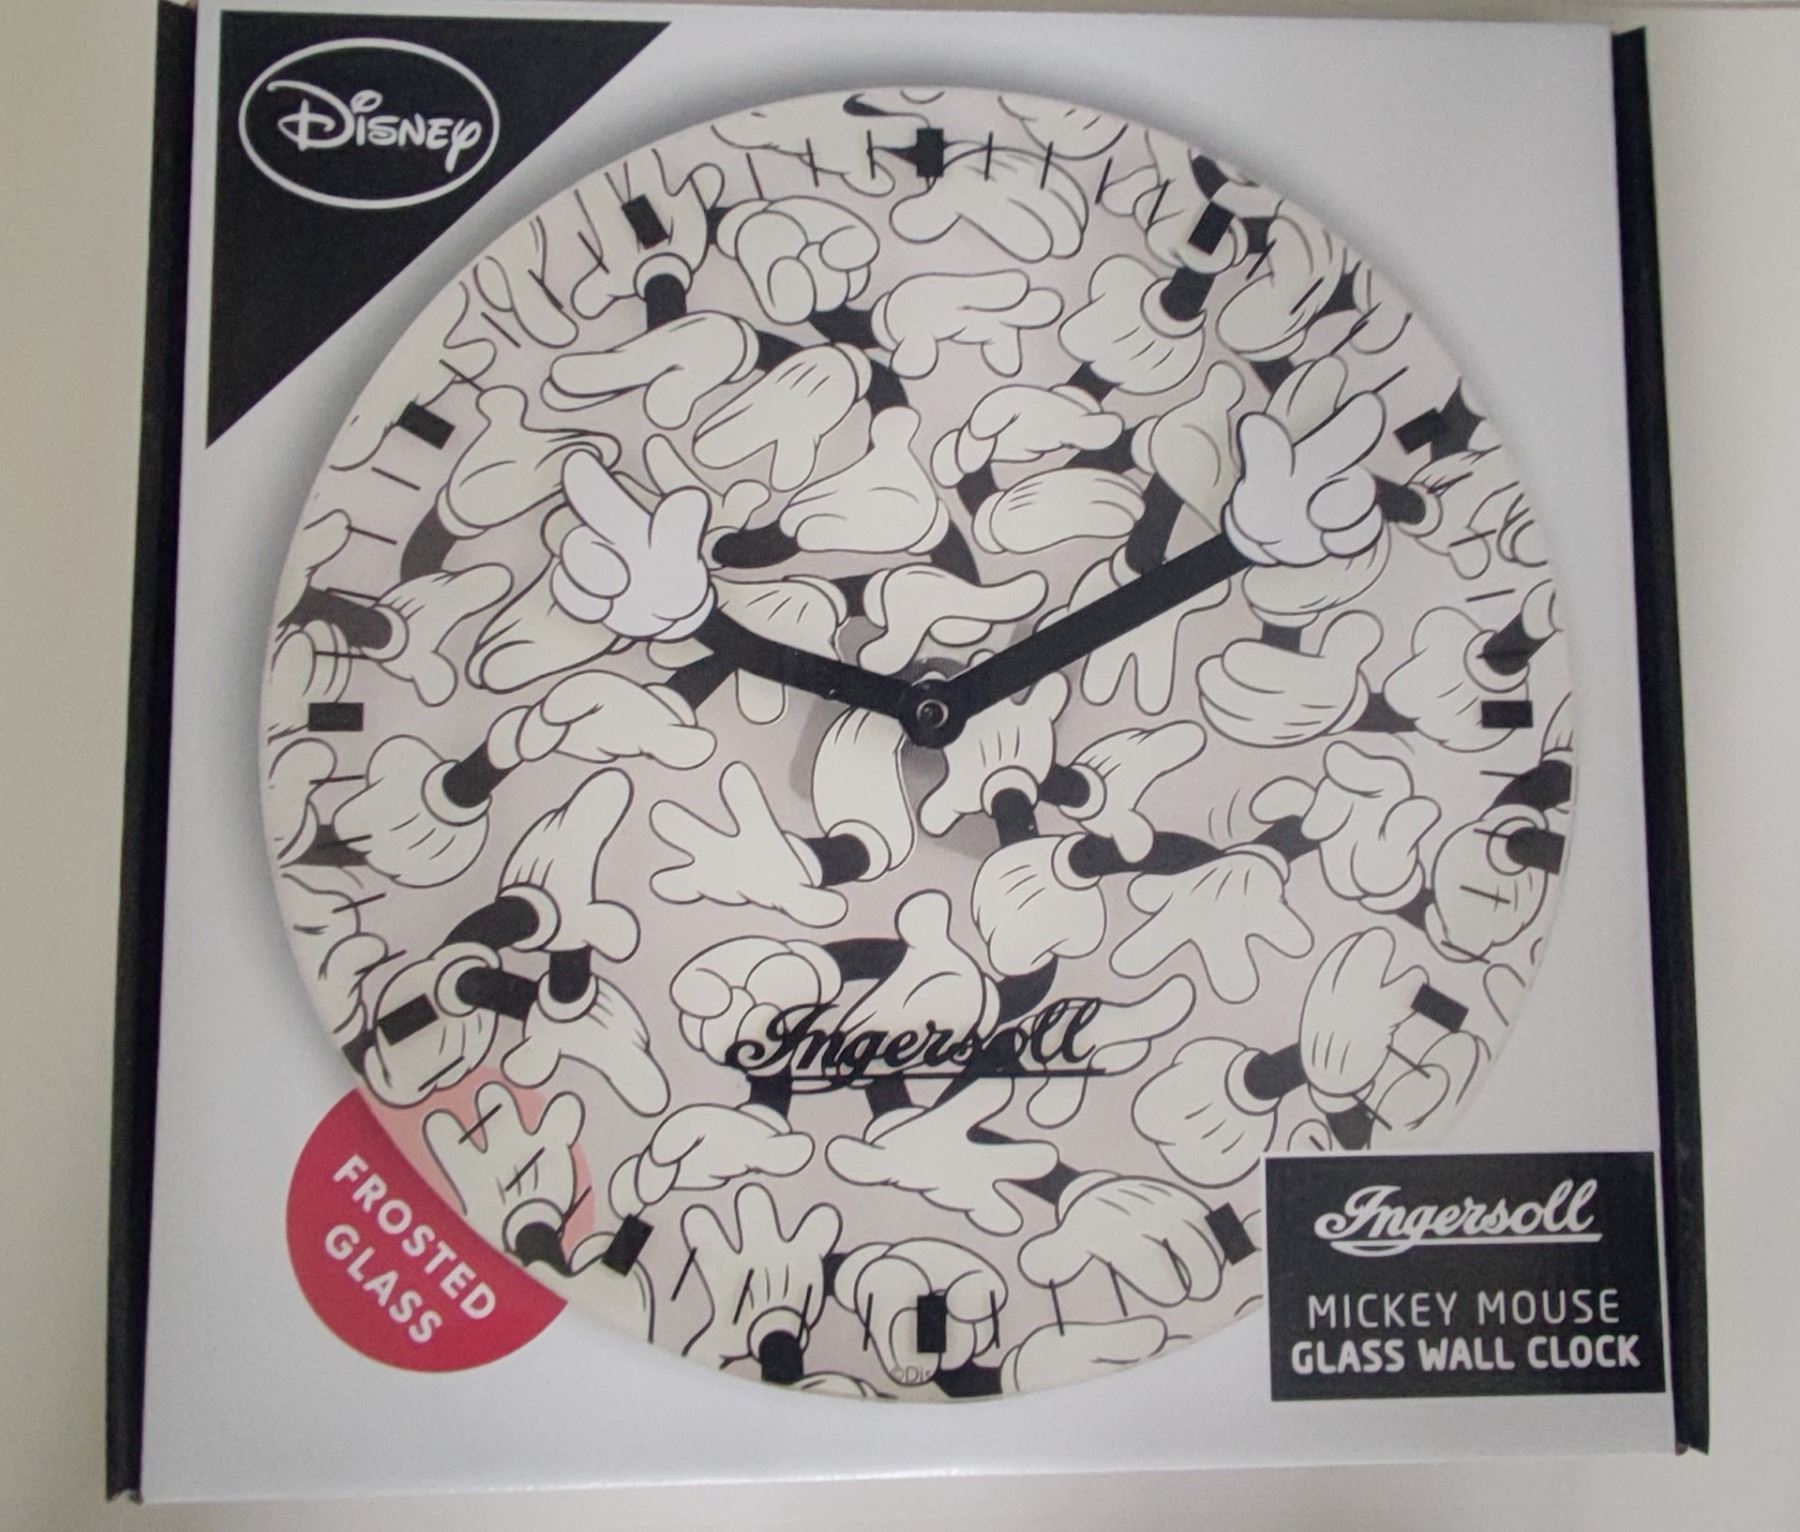 A brand new Disney Ingersoll Mickey Mouse wall clock, width 12 inches.